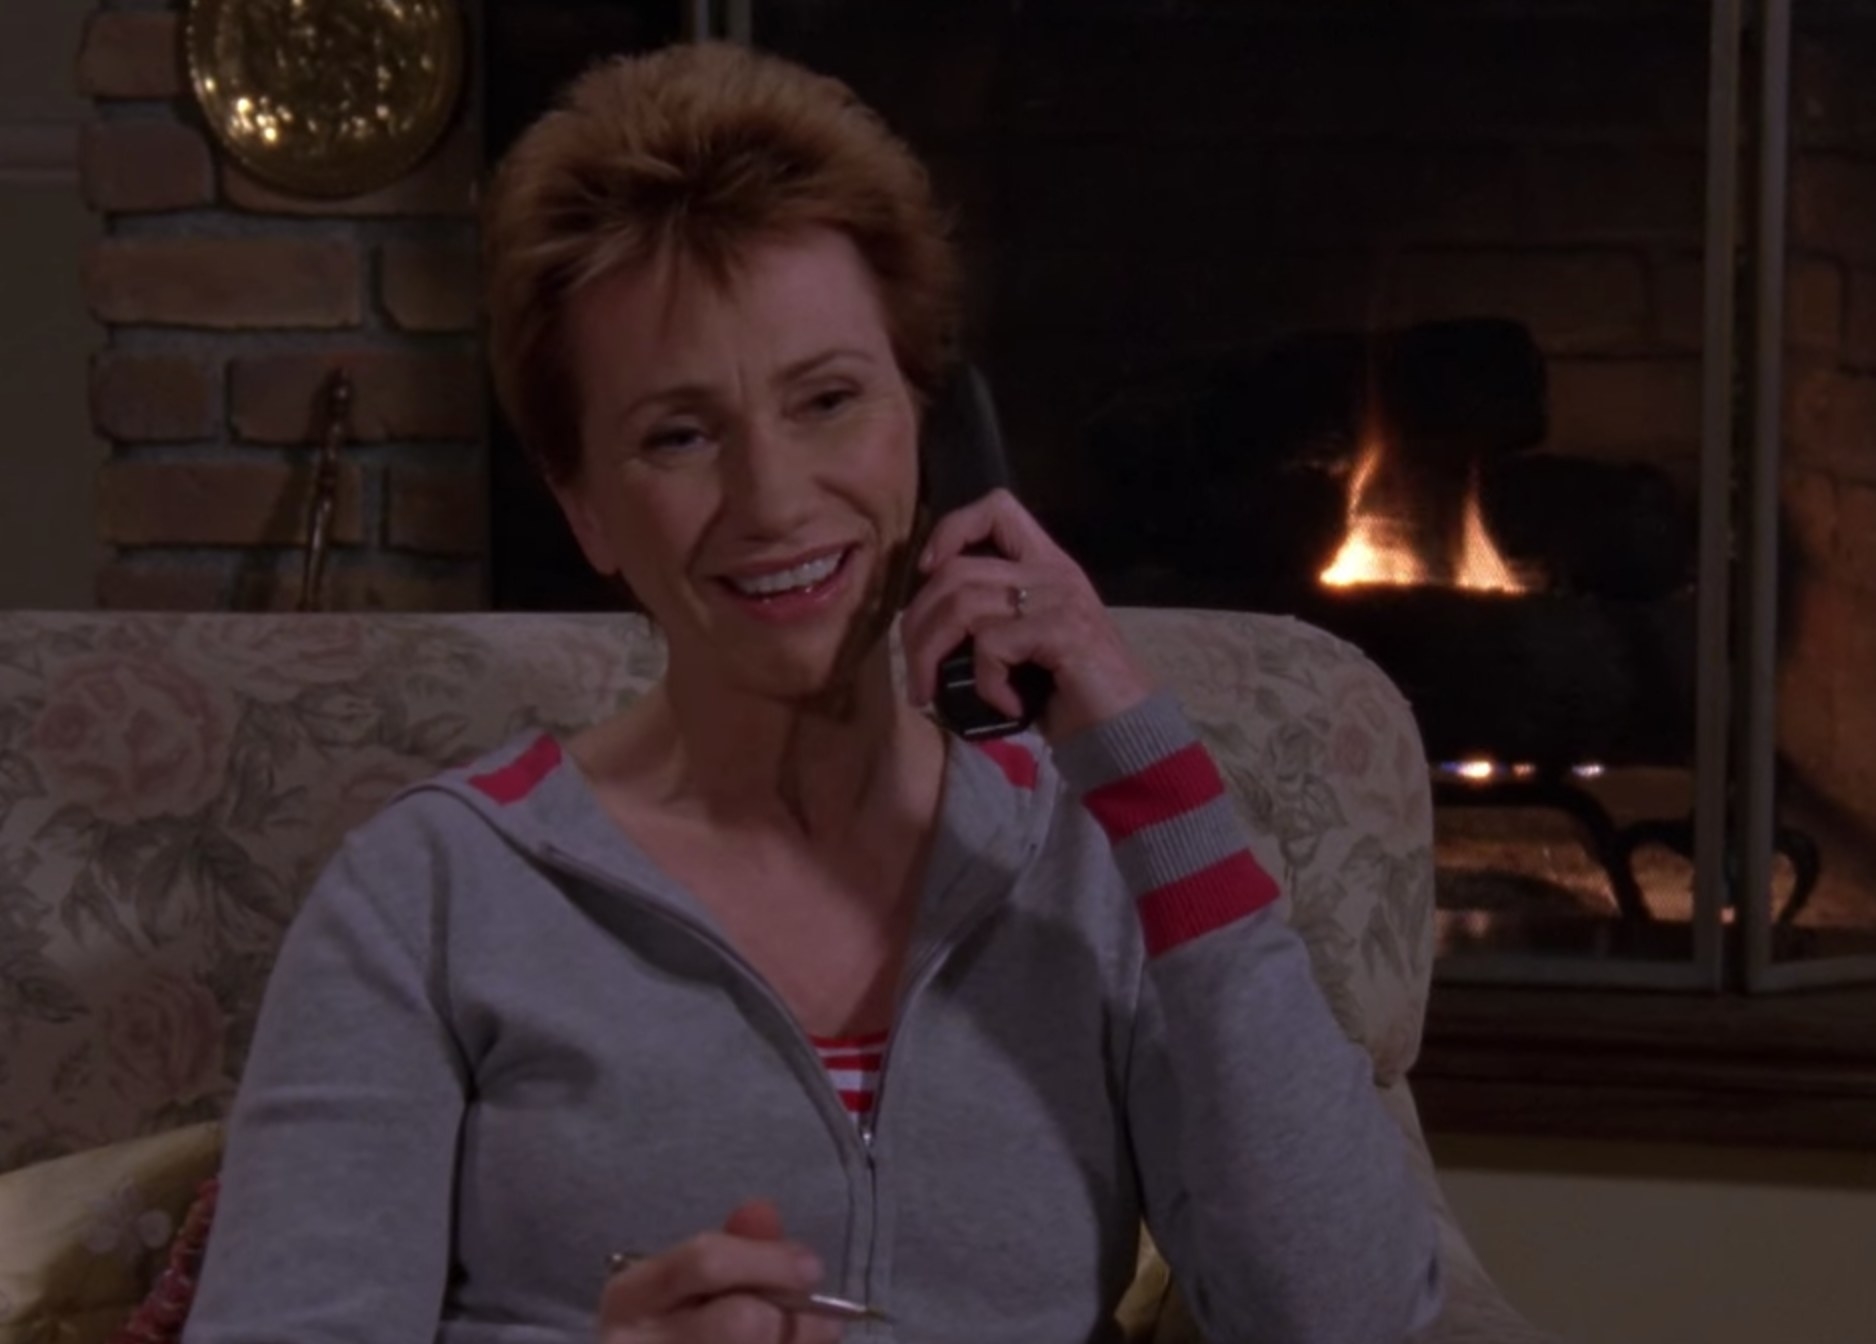 Mia in front of a fireplace on the phone in Gilmore Girls